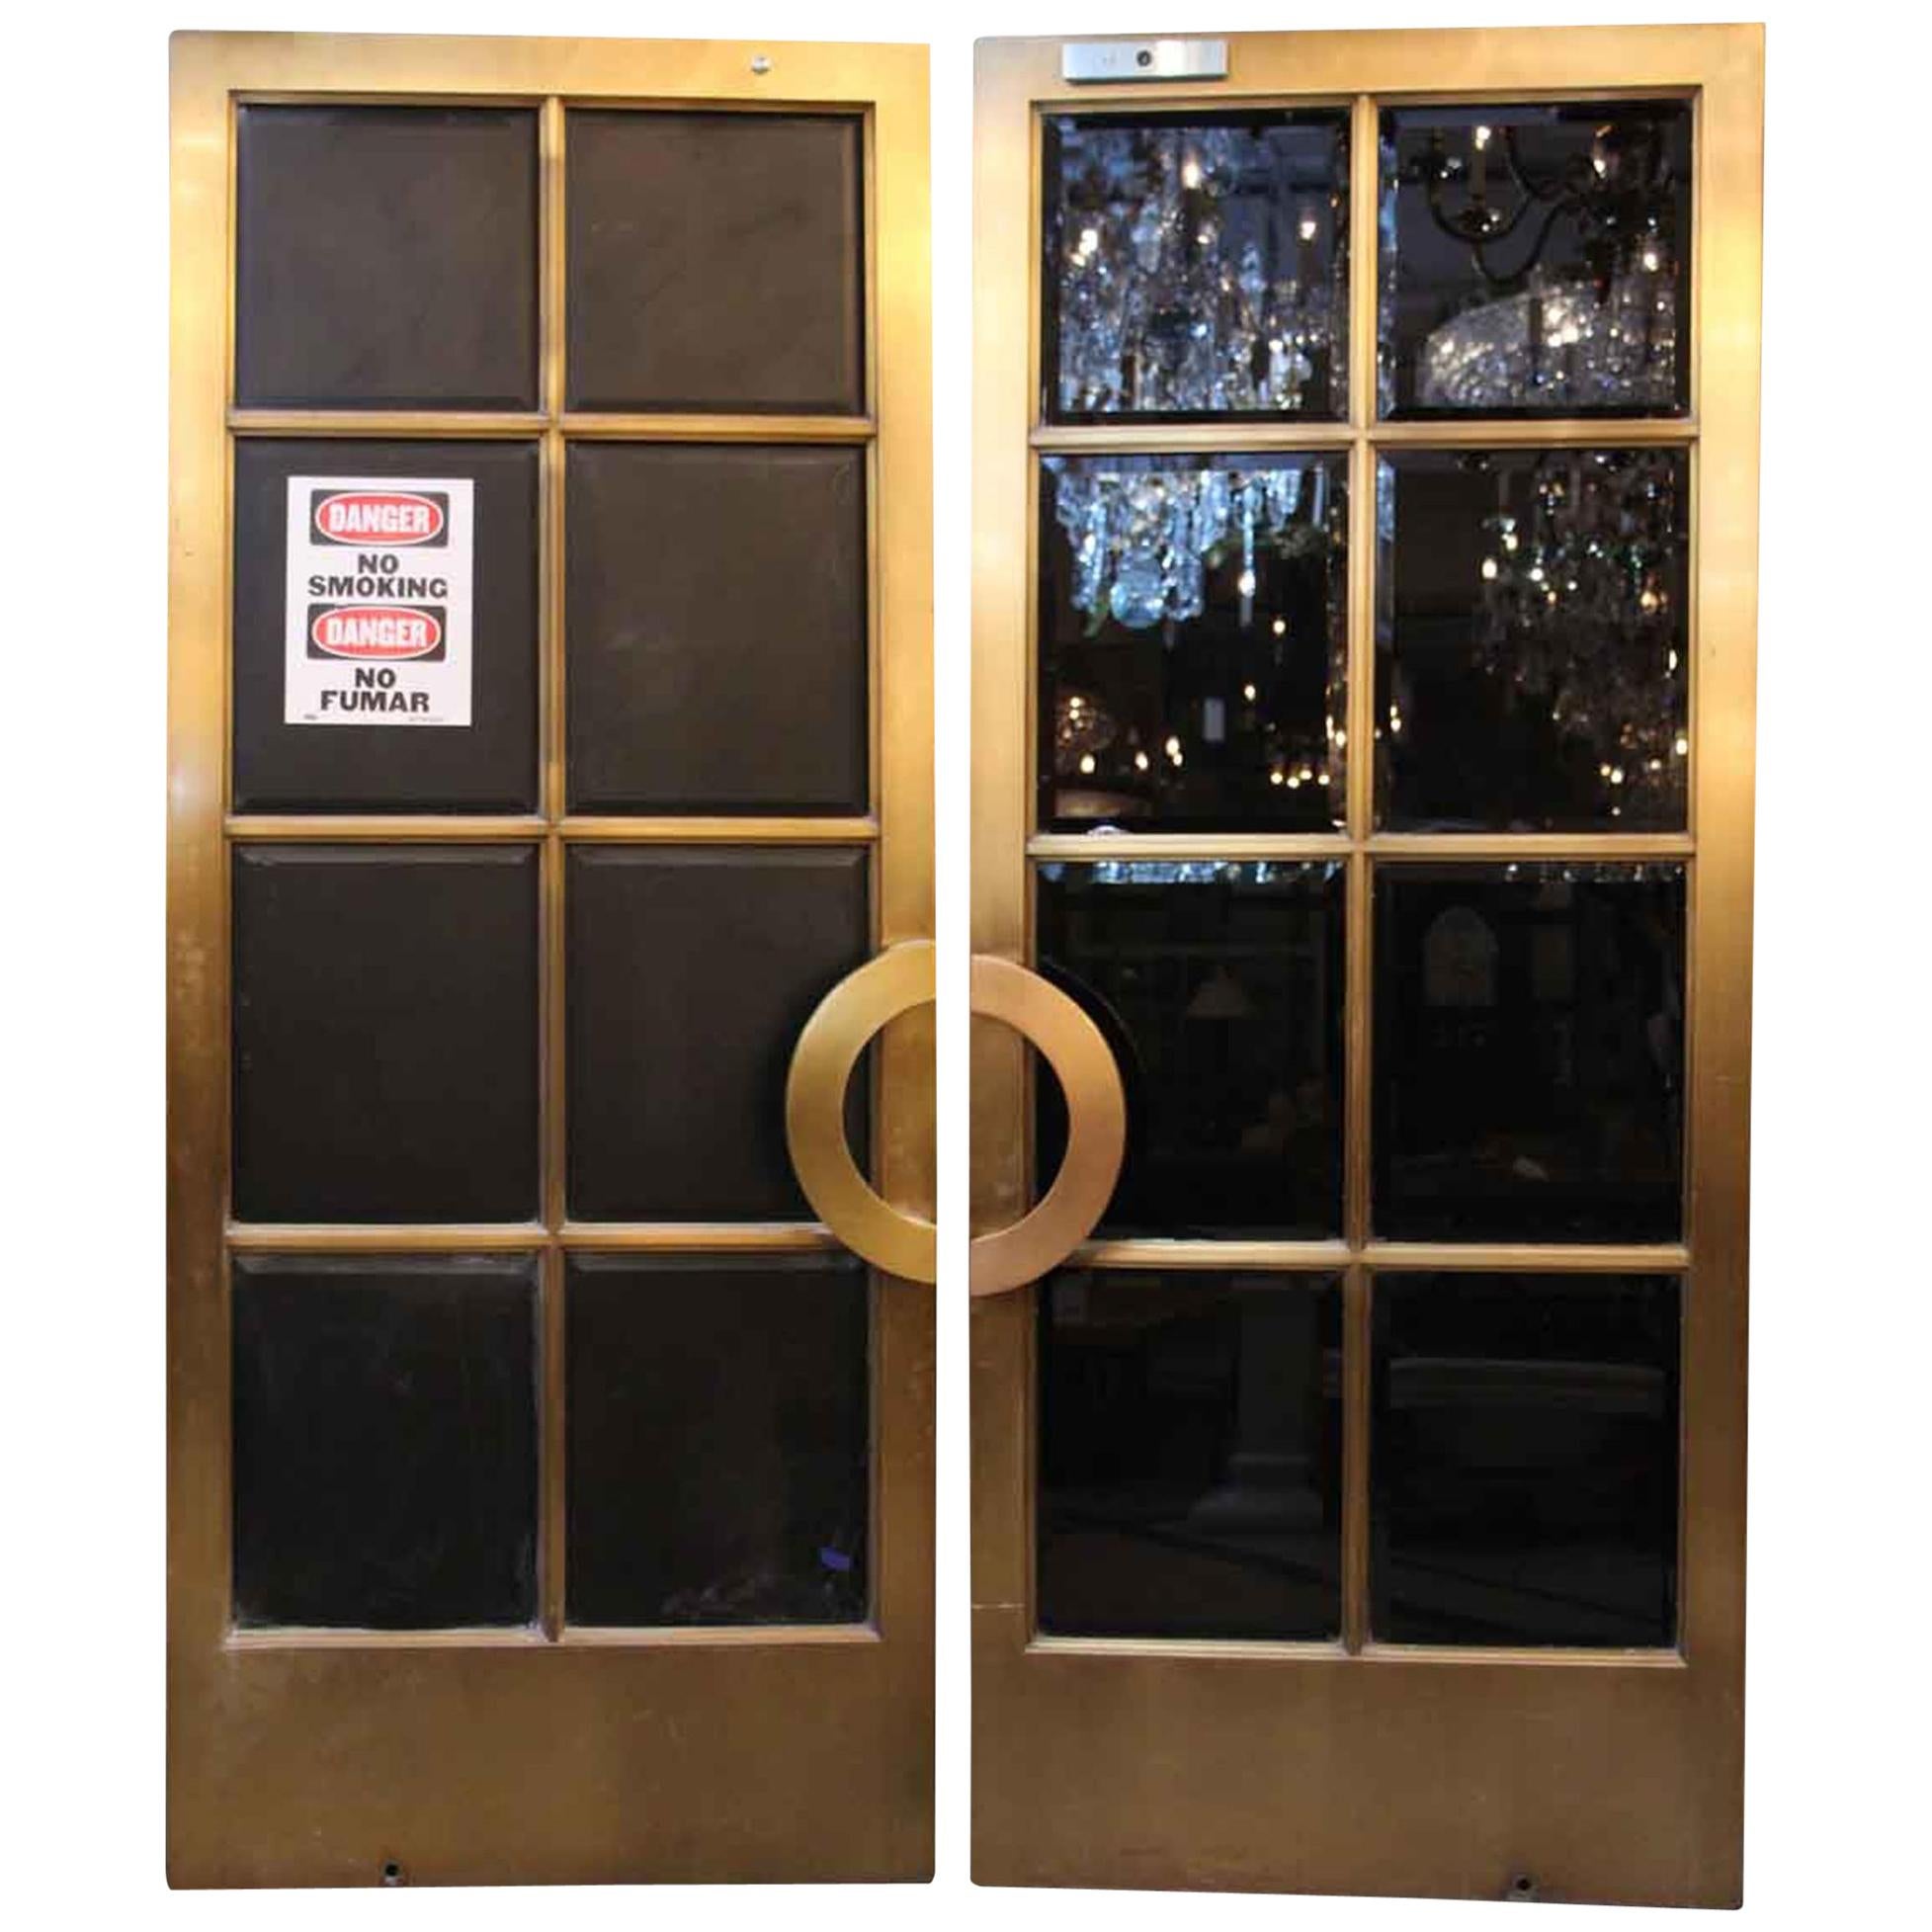 1921 Pair of Bronze Art Deco Doors with Beveled Glass from the Crown Building